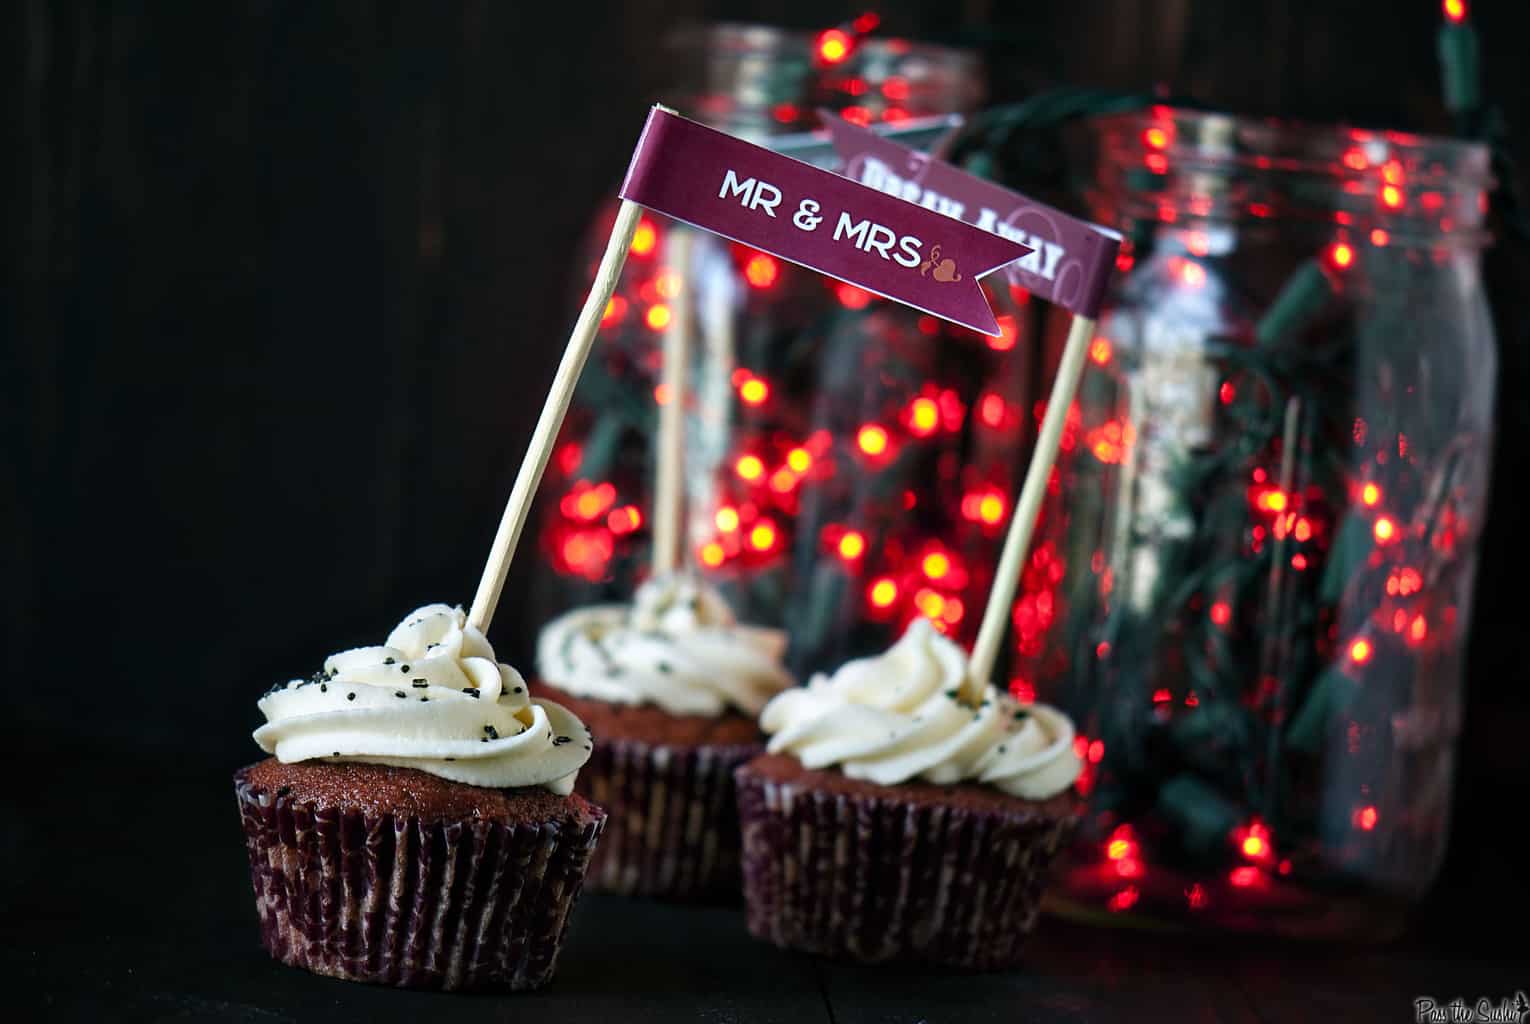 Red velvet cupcakes ﻿will be the perfect Valentine's Day dessert for your sweetie. Chocolate buttermilk cupcakes with fluffy cream cheese frosting on top.